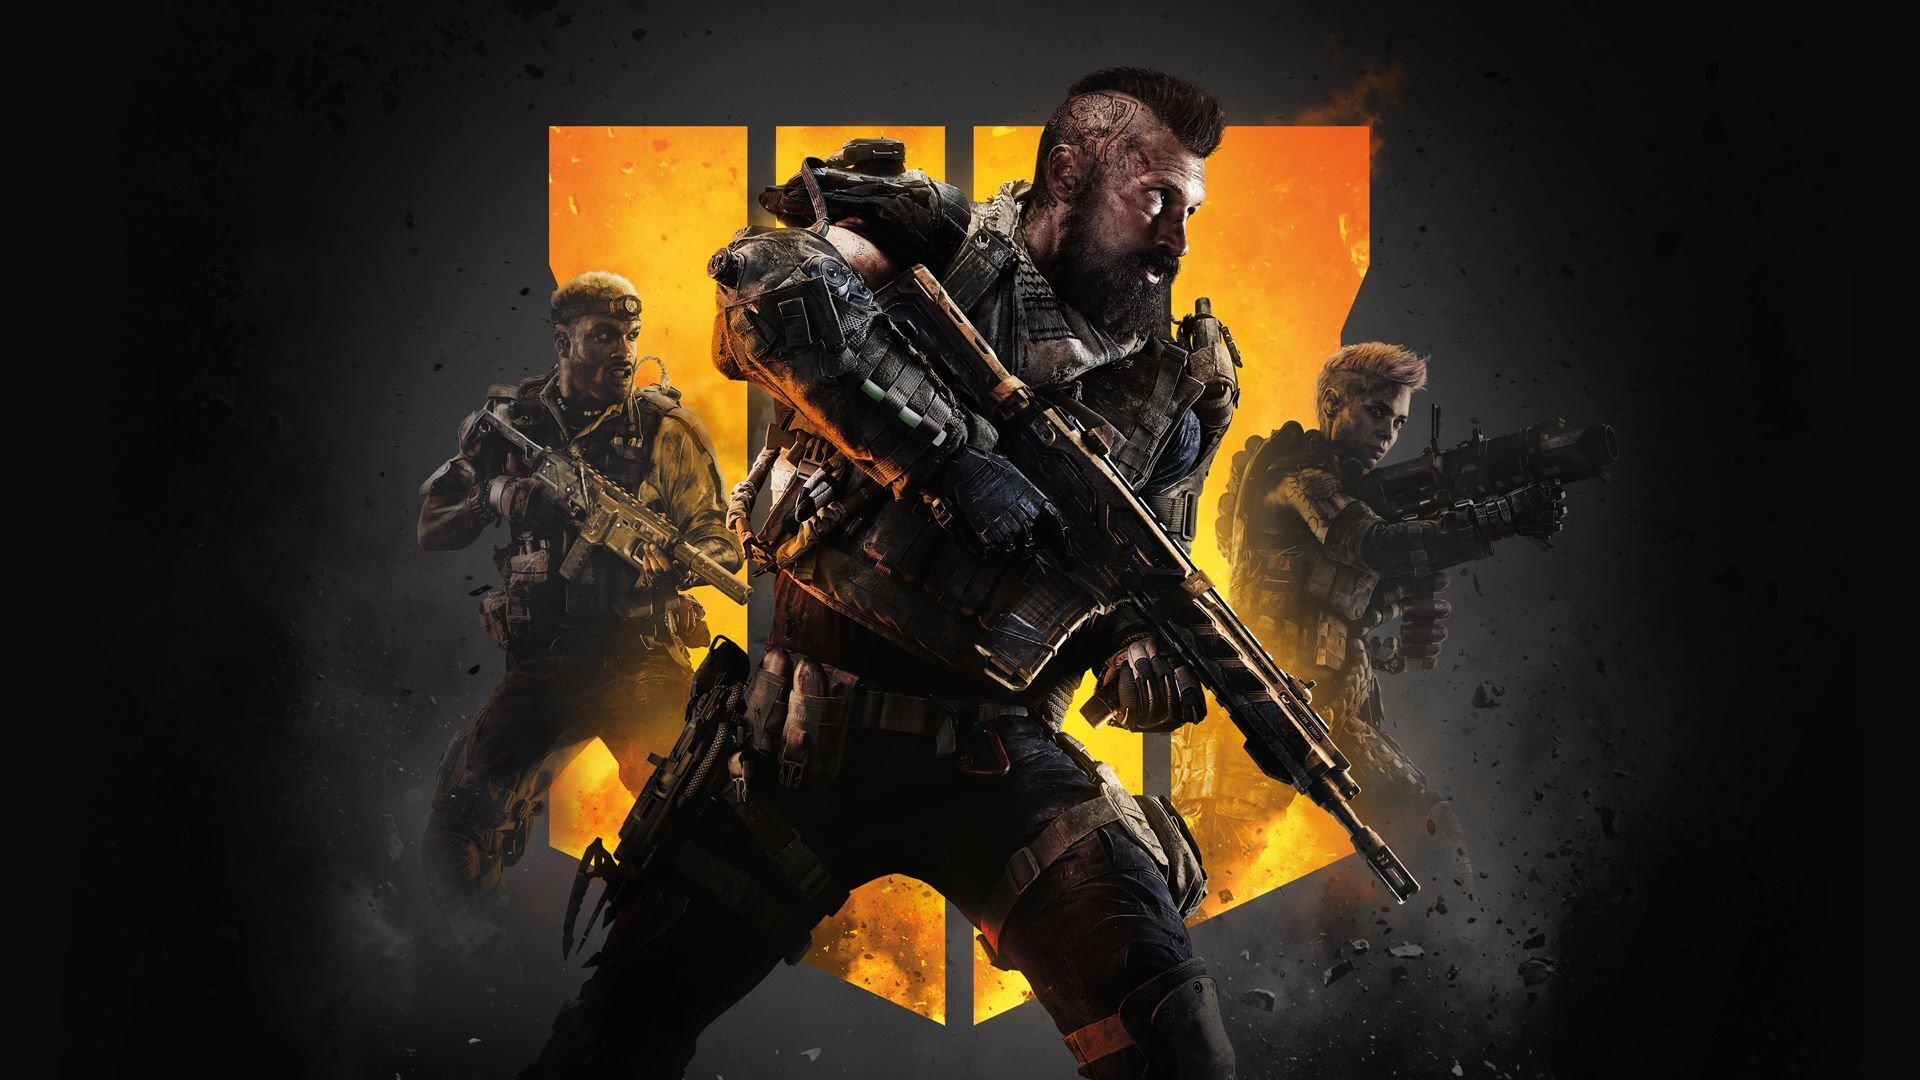 Treyarch announced in a blog post that the competitive matchmaking system for Call of Duty: Black Ops 4, League Play, will be delayed until 2019.